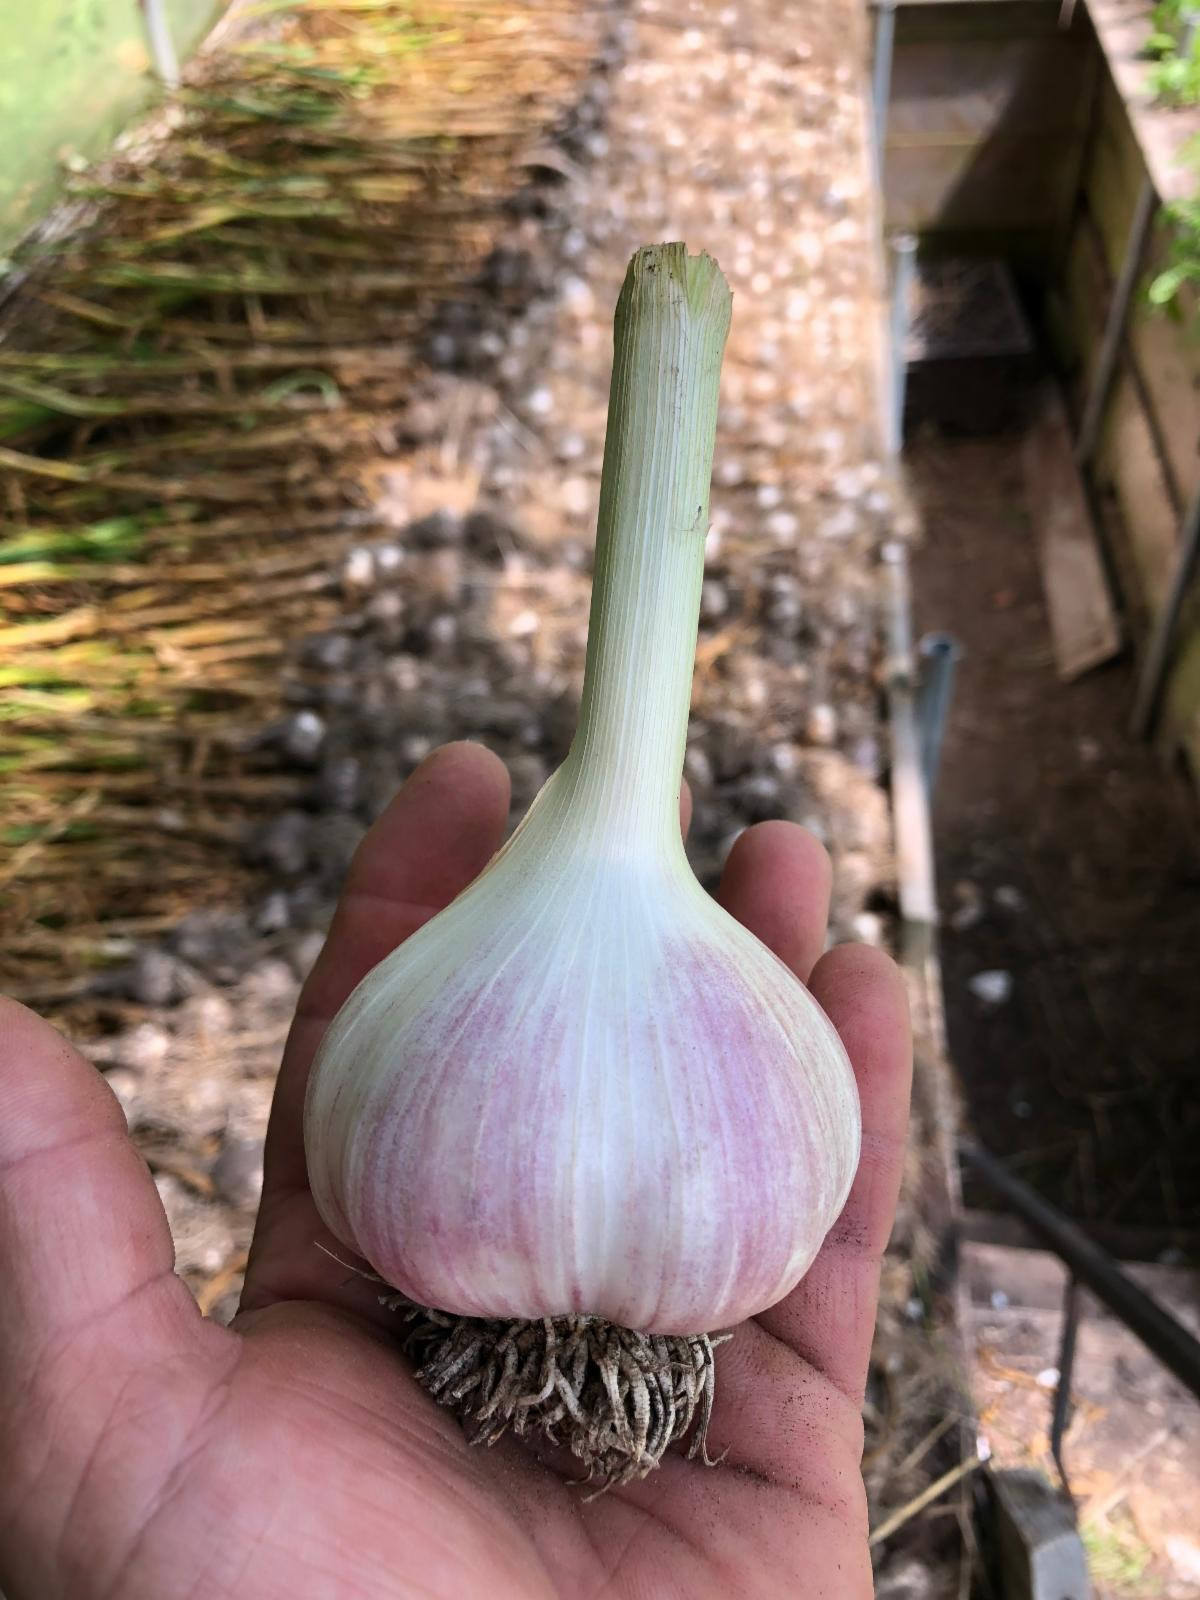 A photo of a head of garlic in a person's hand.